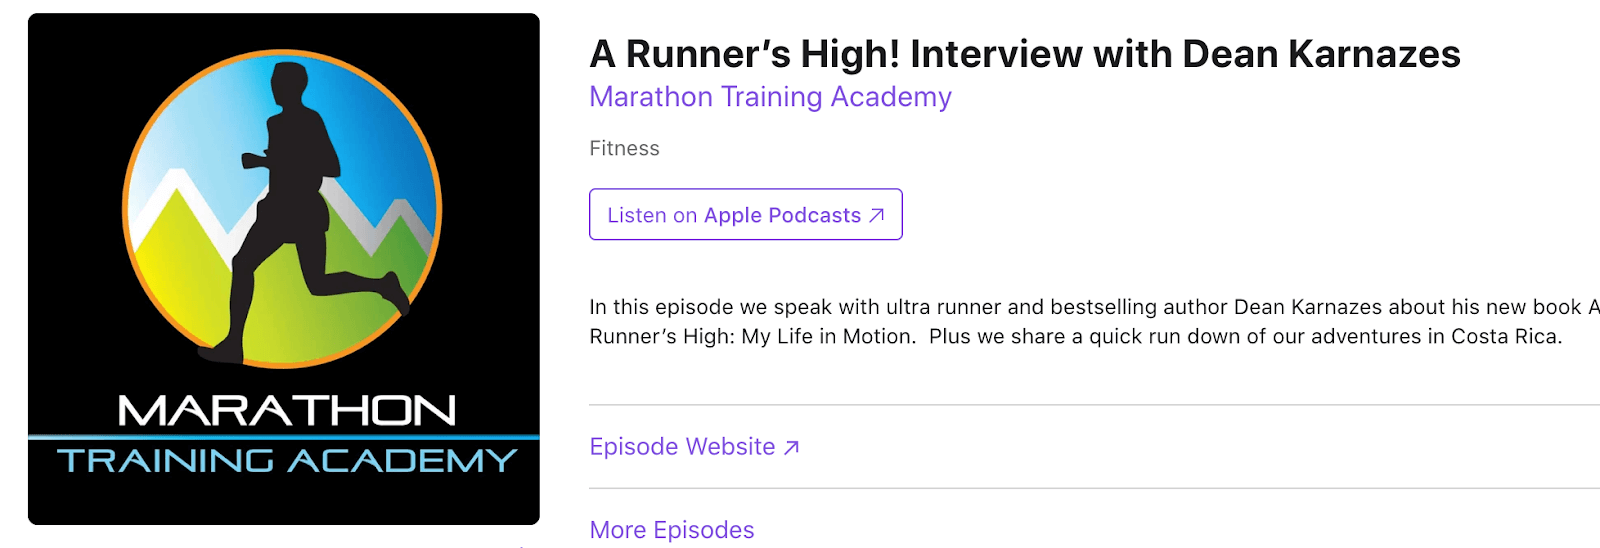 Marathon Training Academy inviting high profile guests as a podcast marketing strategy